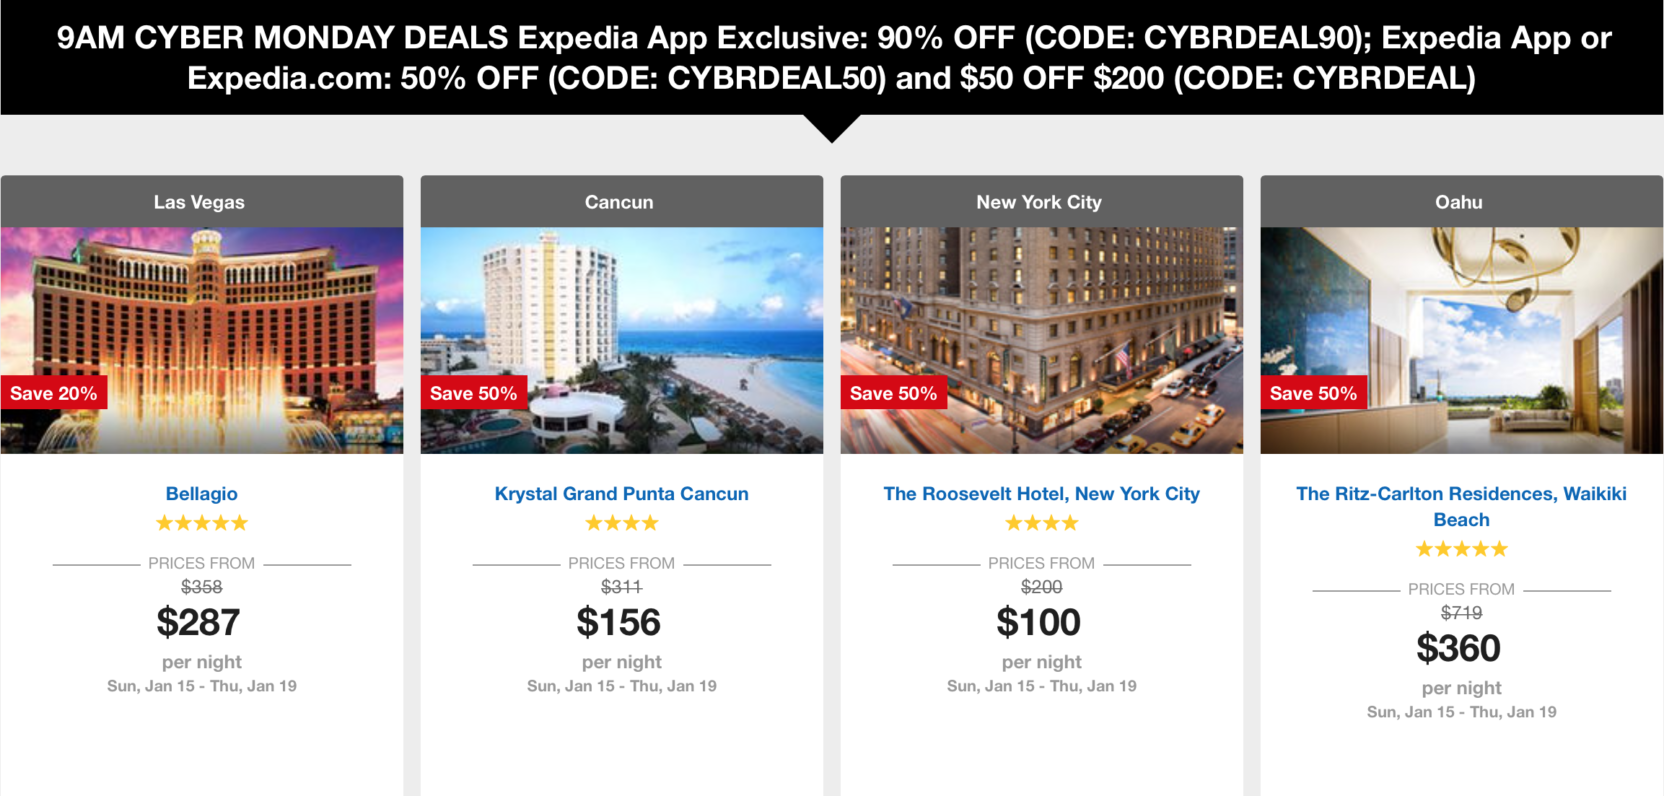 Up To 90 Percent Off Of Select Hotels With Expedia Cyber Monday Sale 2016 The Gatethe Gate